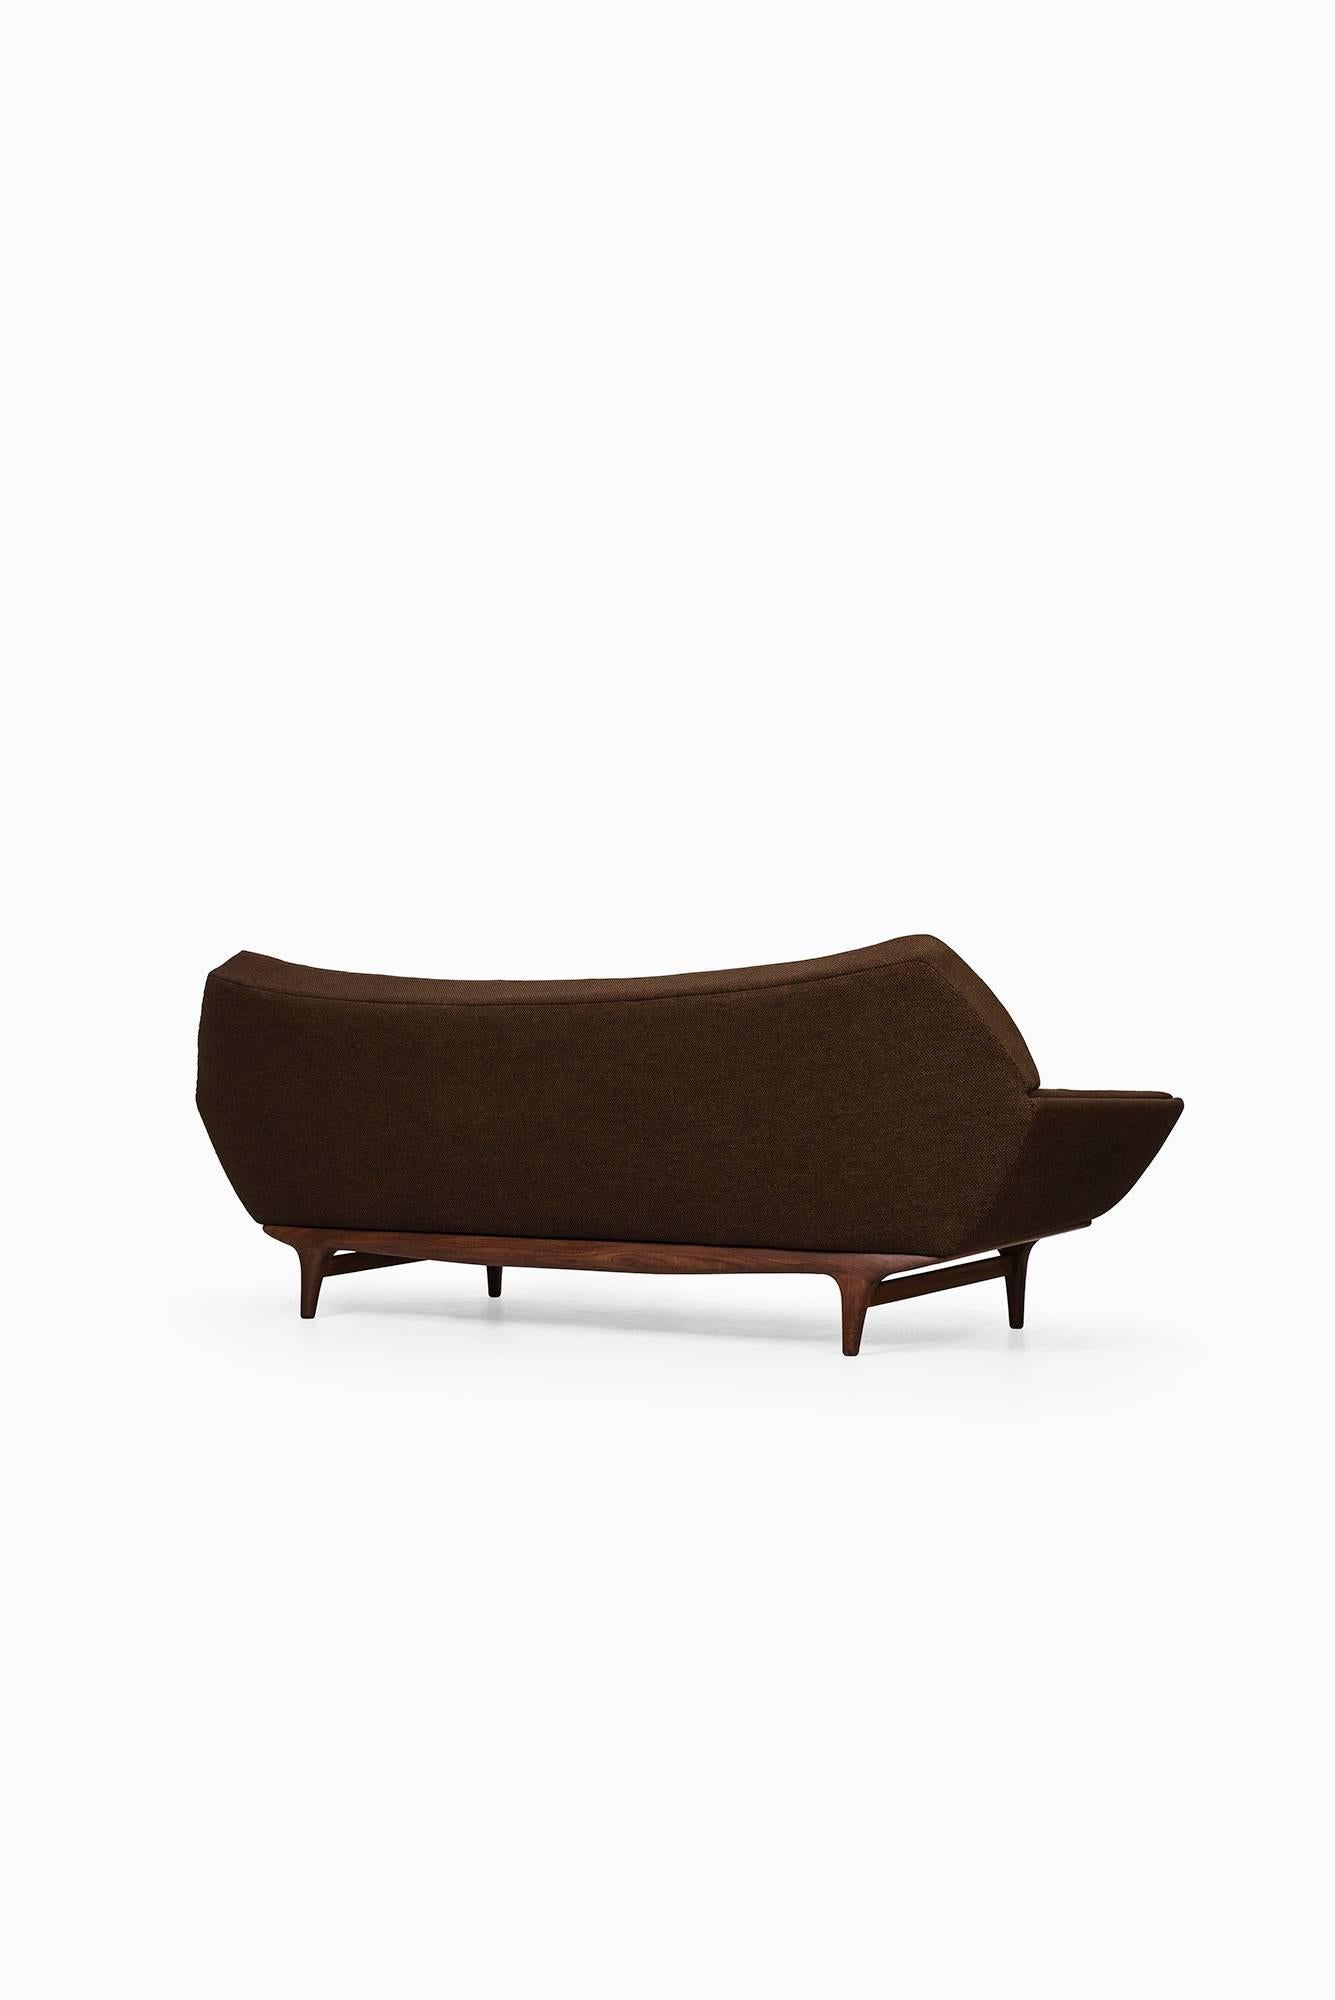 Mid-20th Century Johannes Andersen Sofa by Trensums in Sweden